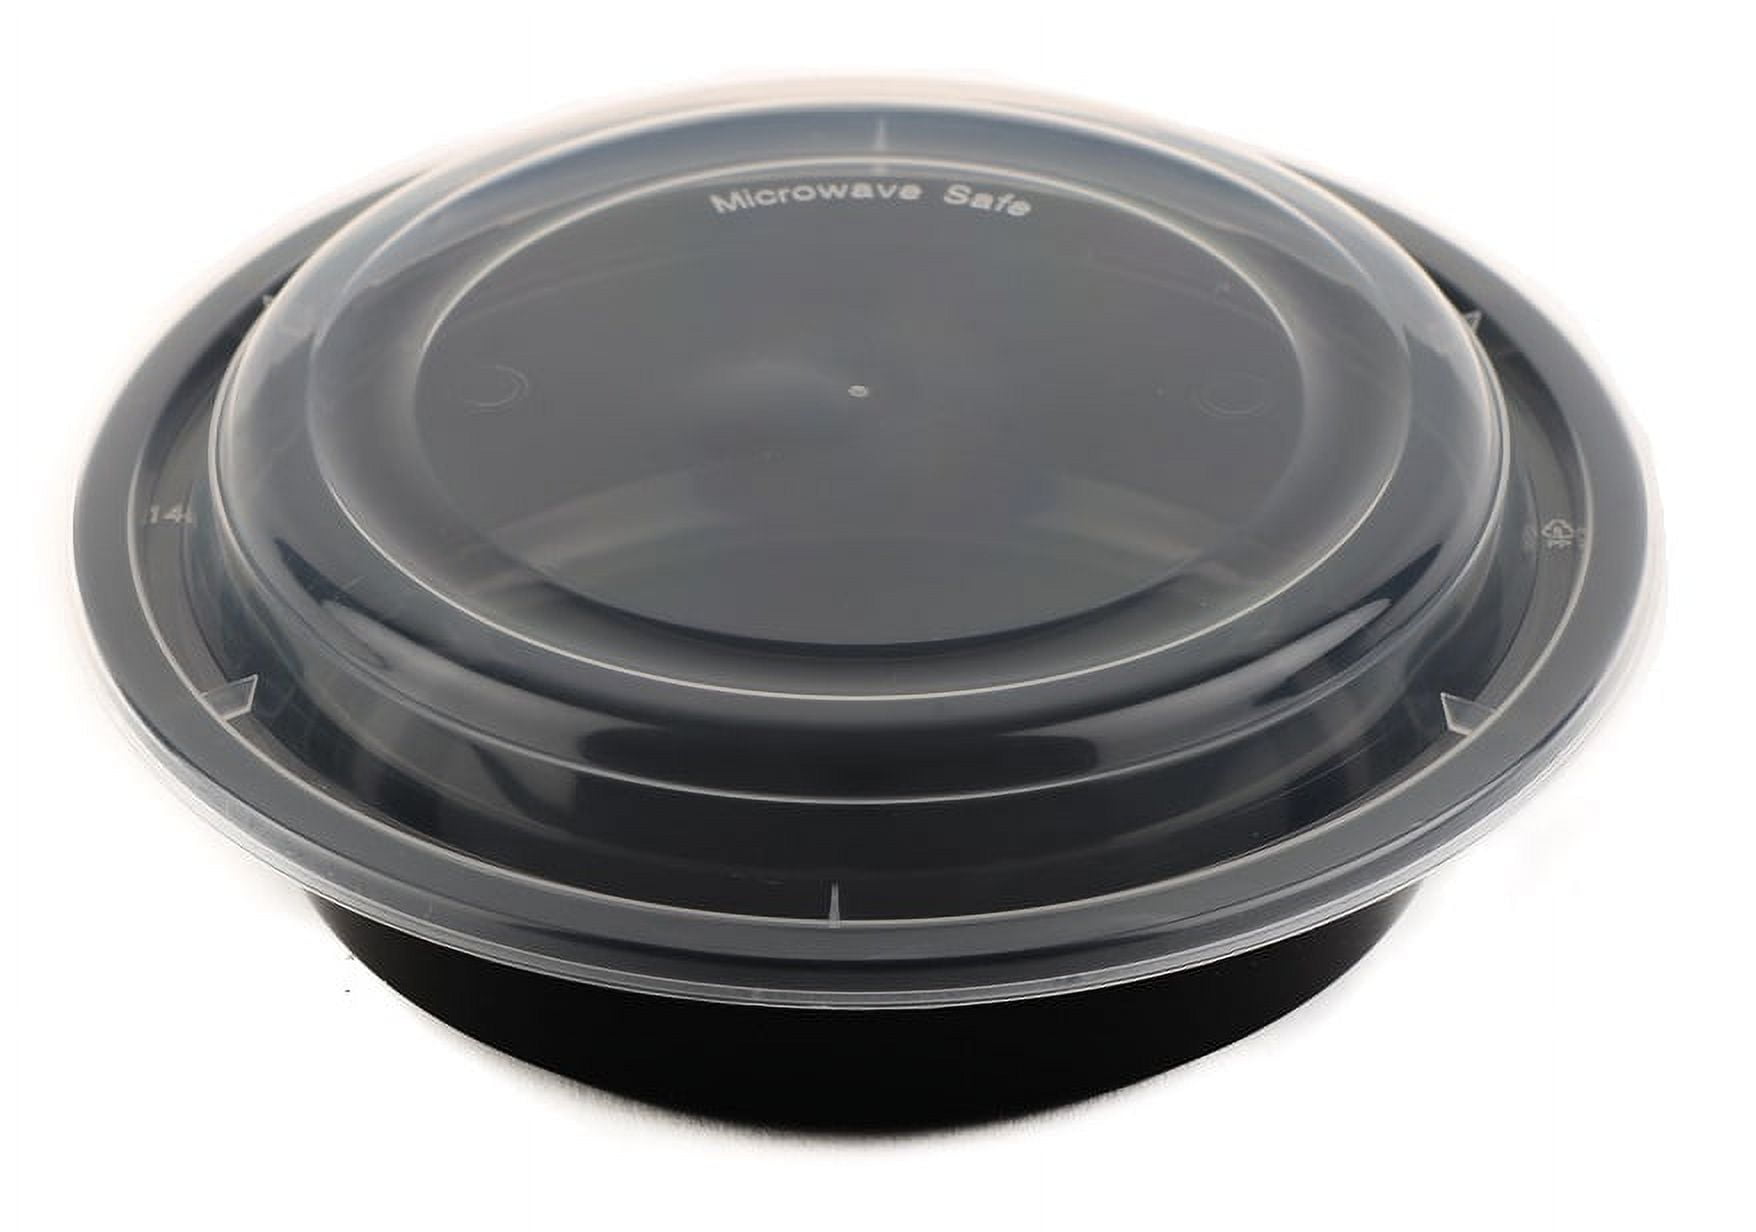 [25 Count] 16 oz Black Plastic Meal Prep Containers with Lids - Round Food Storage Container Microwave Safe - BPA-Free, Stackable, Reusable